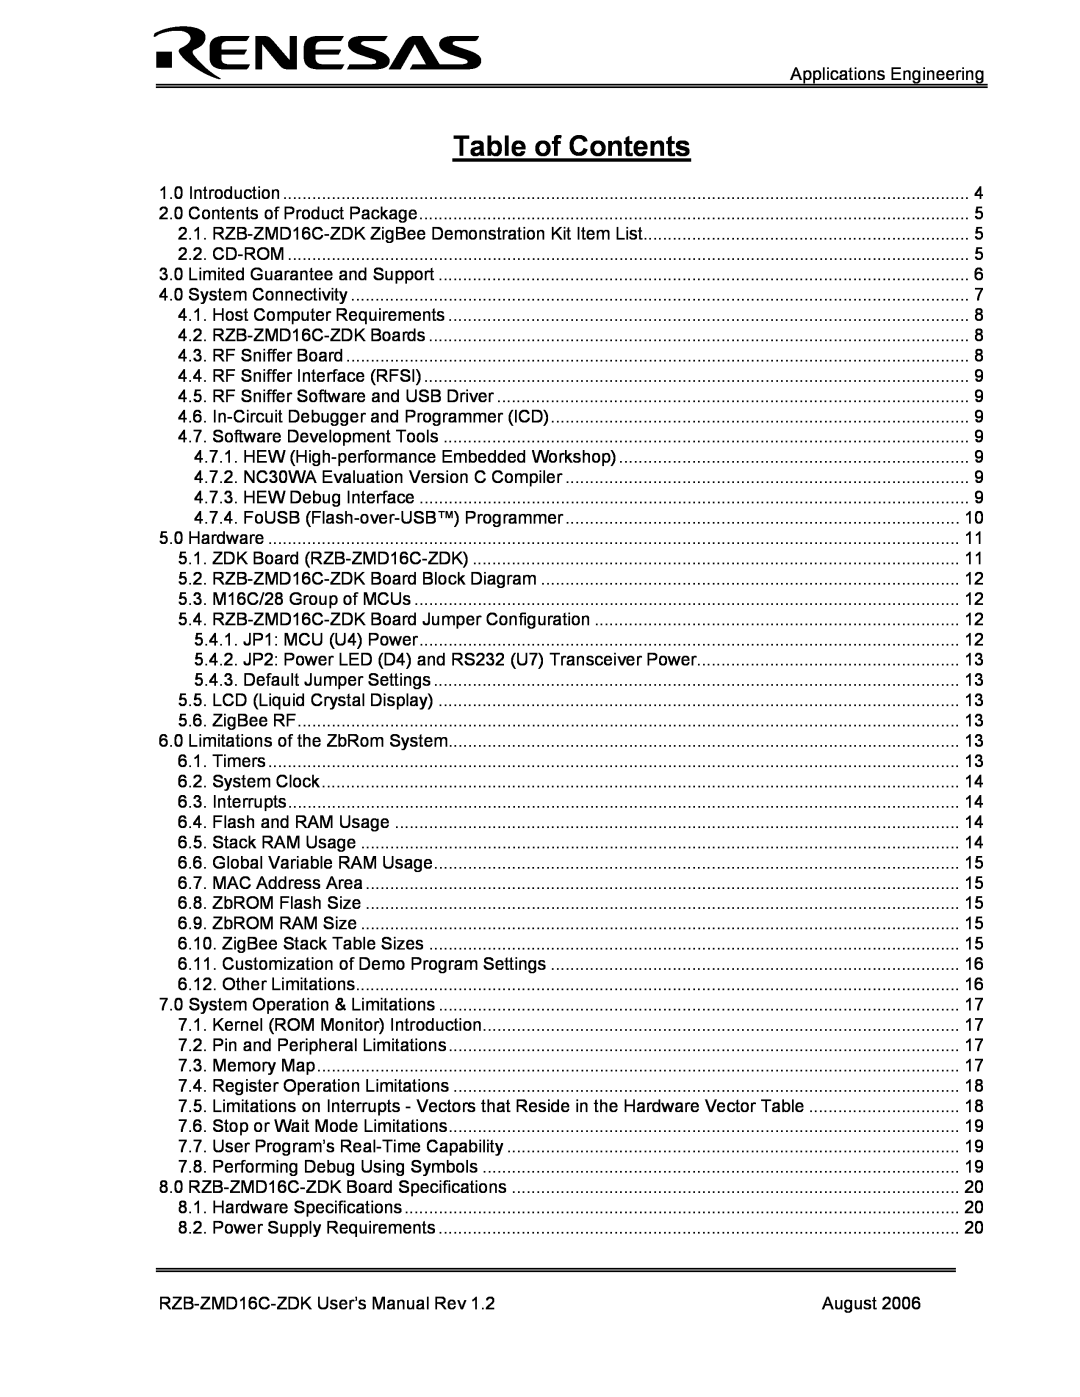 Renesas RZB-ZMD16C-ZDK user manual Table of Contents 